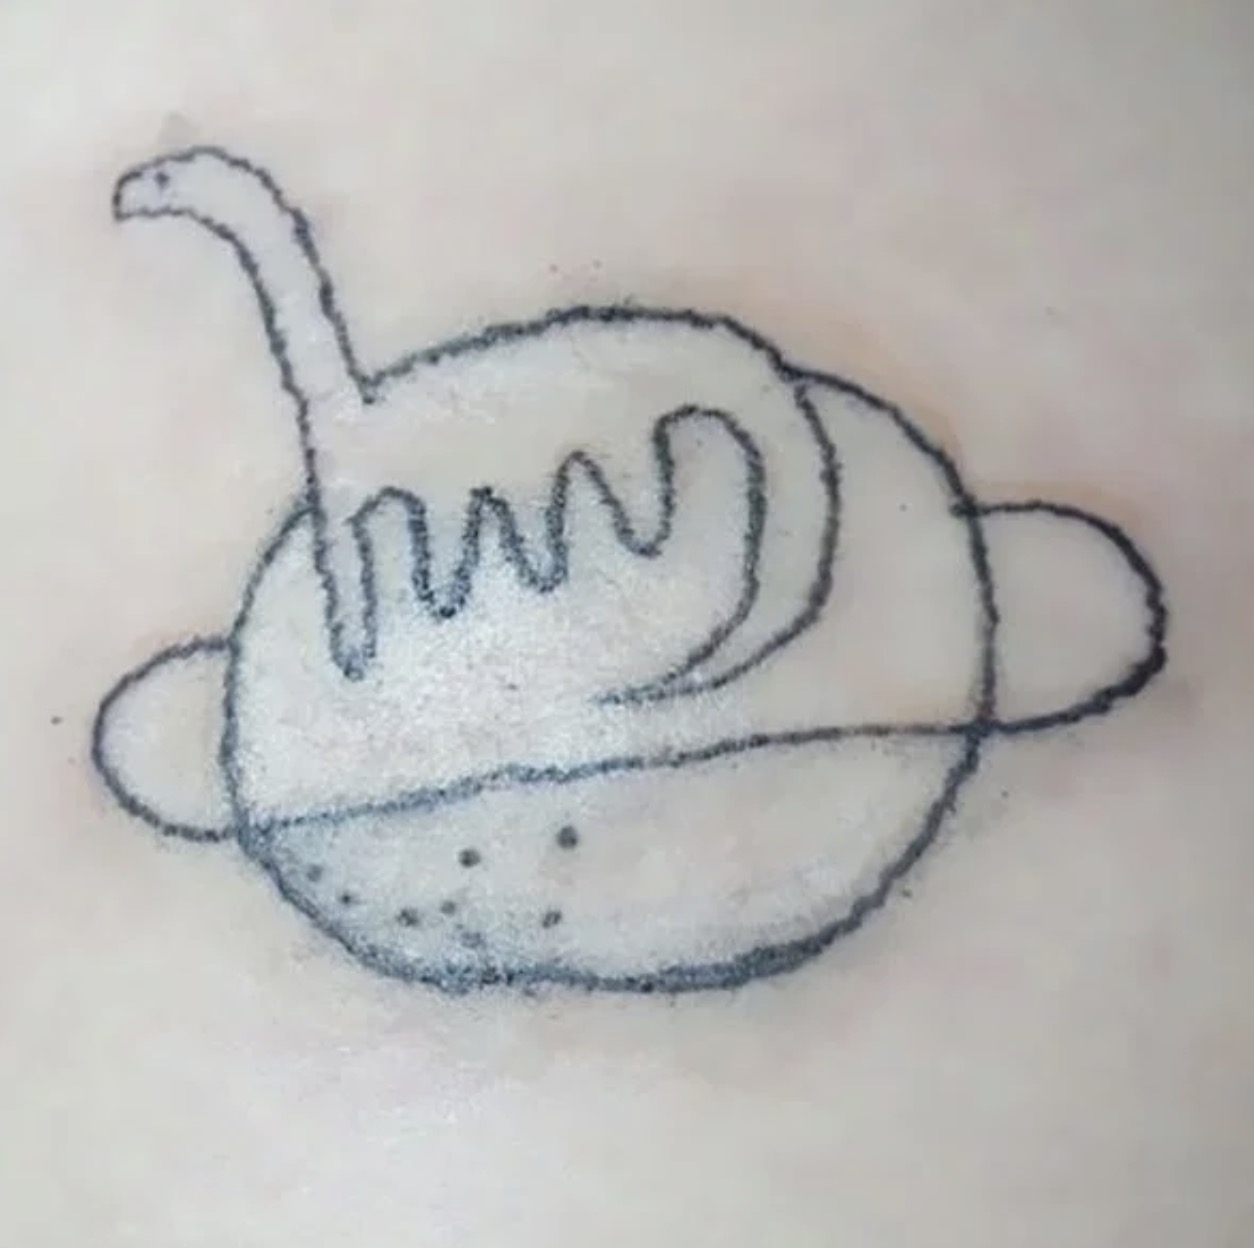 Is this a well or poorly done tattoo? : r/tattoo